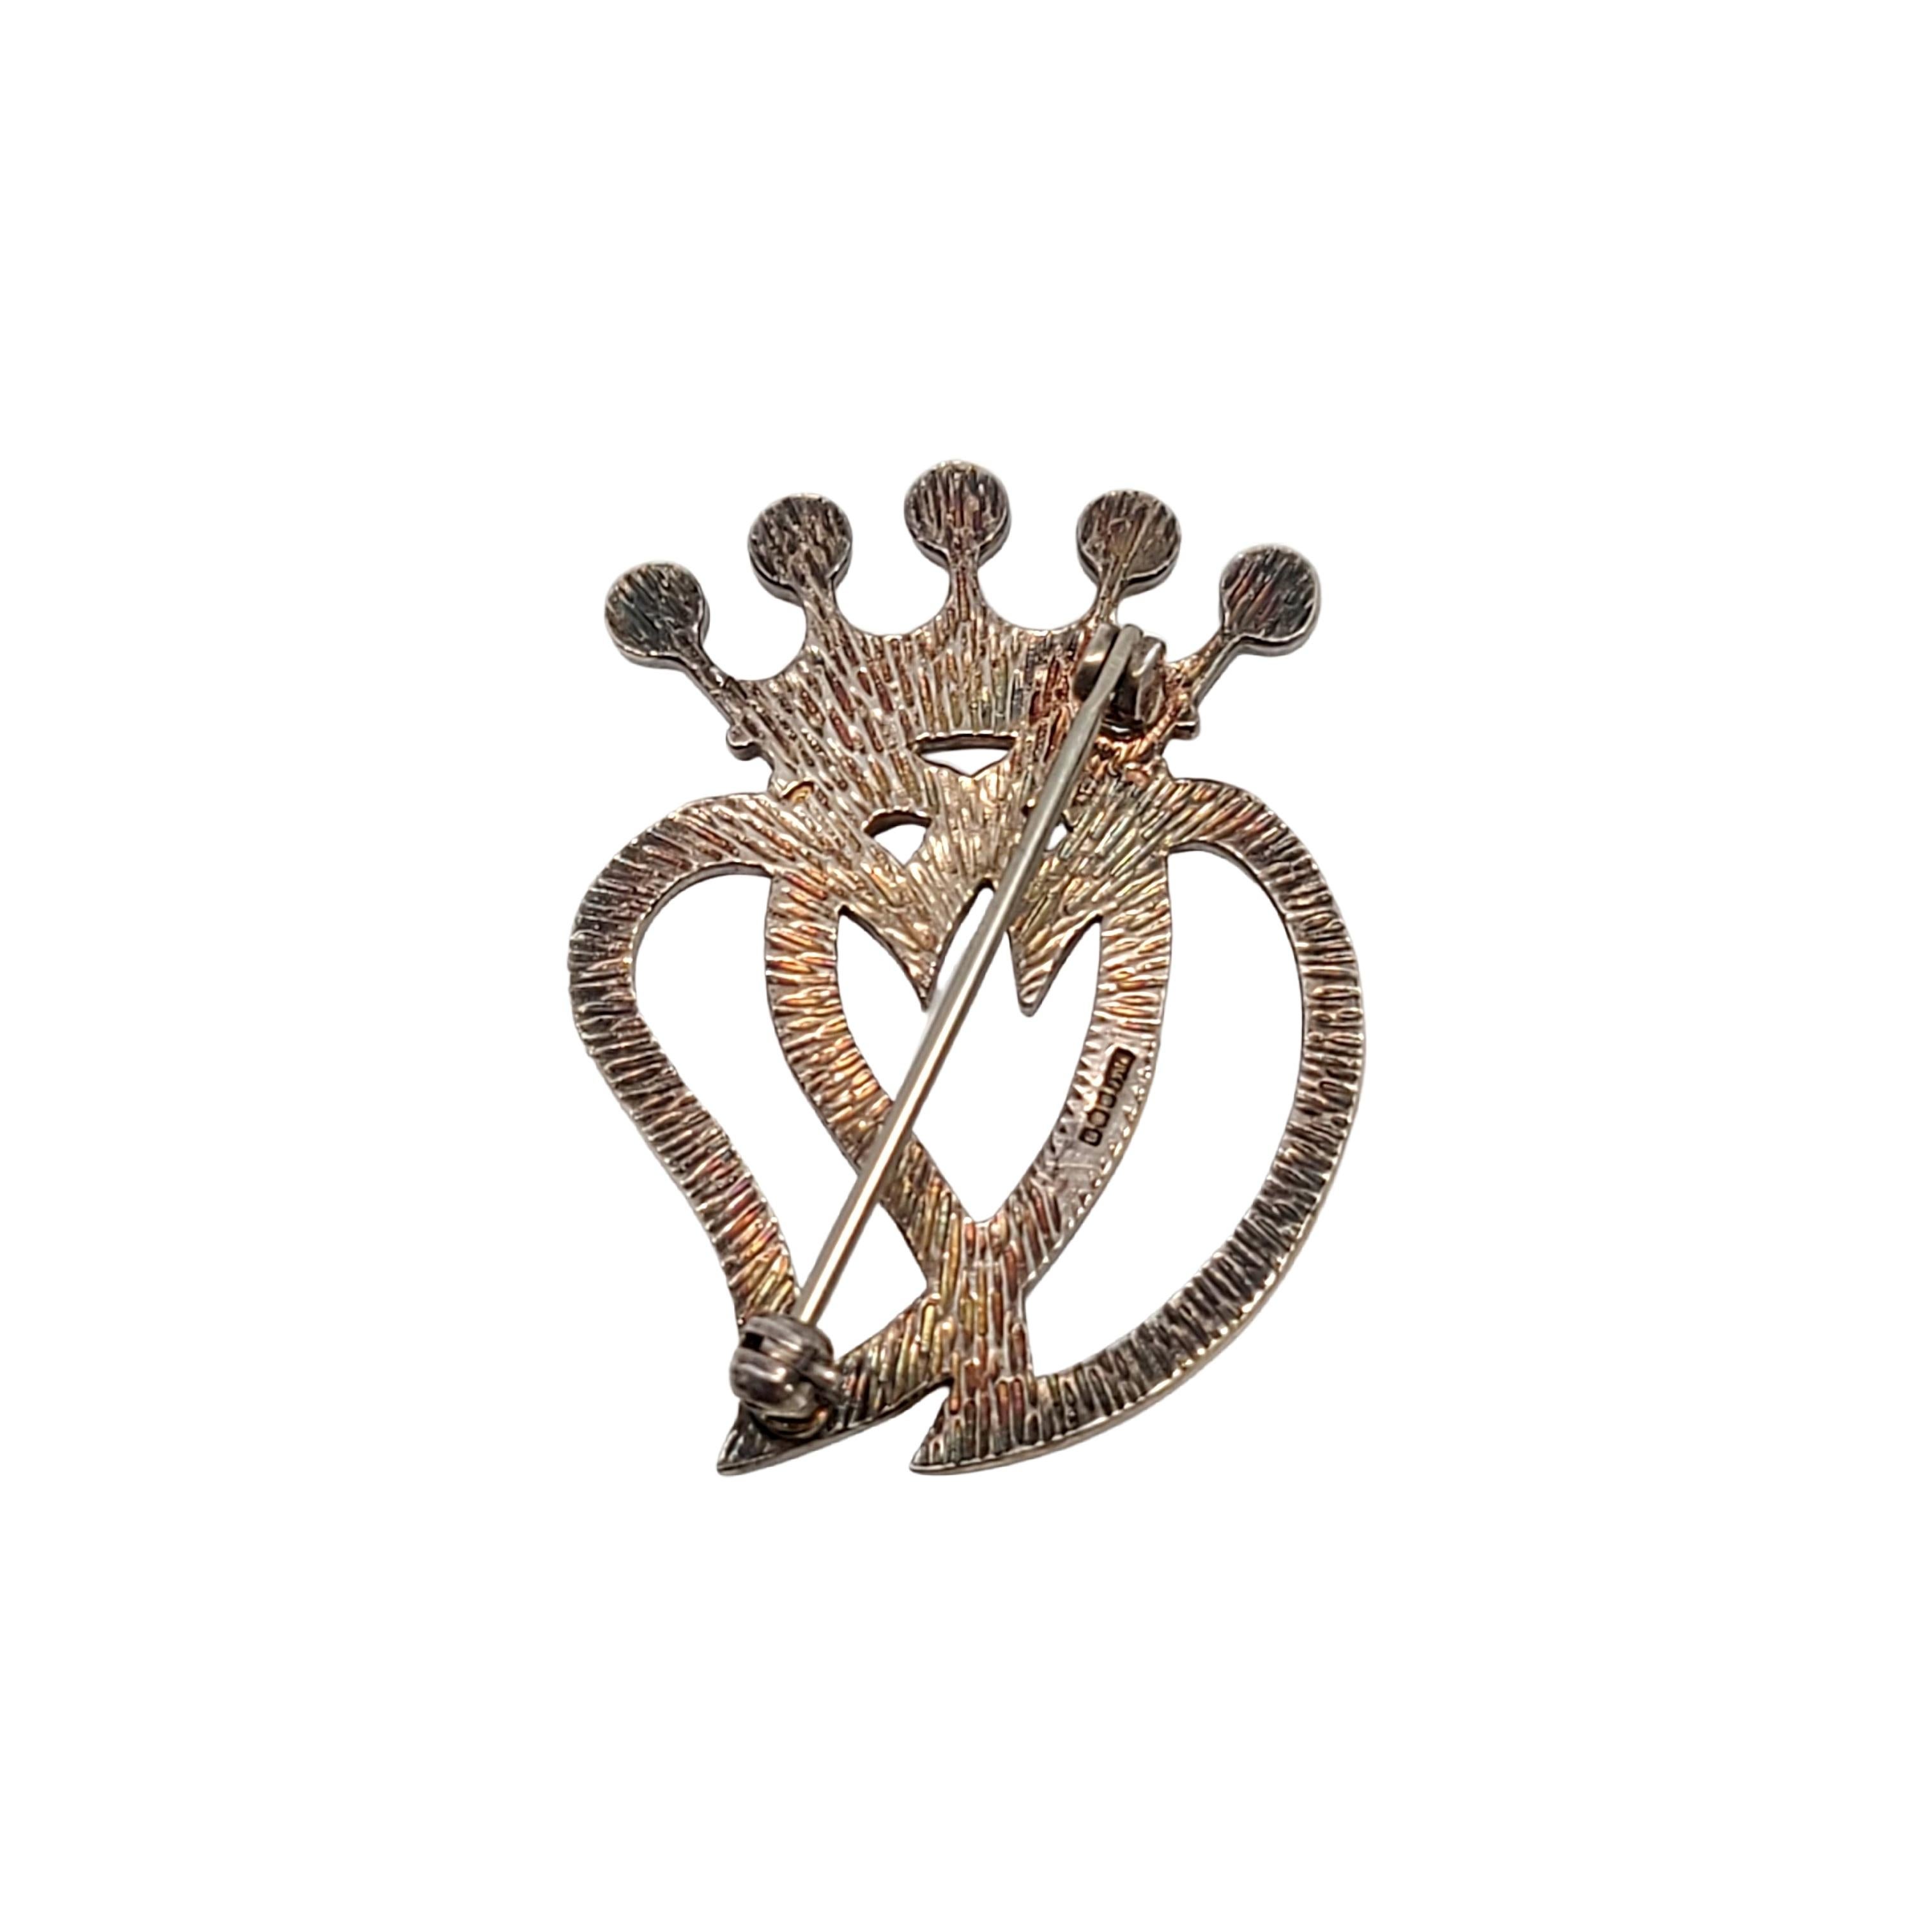 Vintage sterling silver Luckenbooth heart pin by designer Ola M Gorie, circa 1992.

Luckenbooth pins date to the 16th century in Edinburgh when it was common to give them as tokens of love or luck, to ward of witches.

Pin measures approx 1 1/2